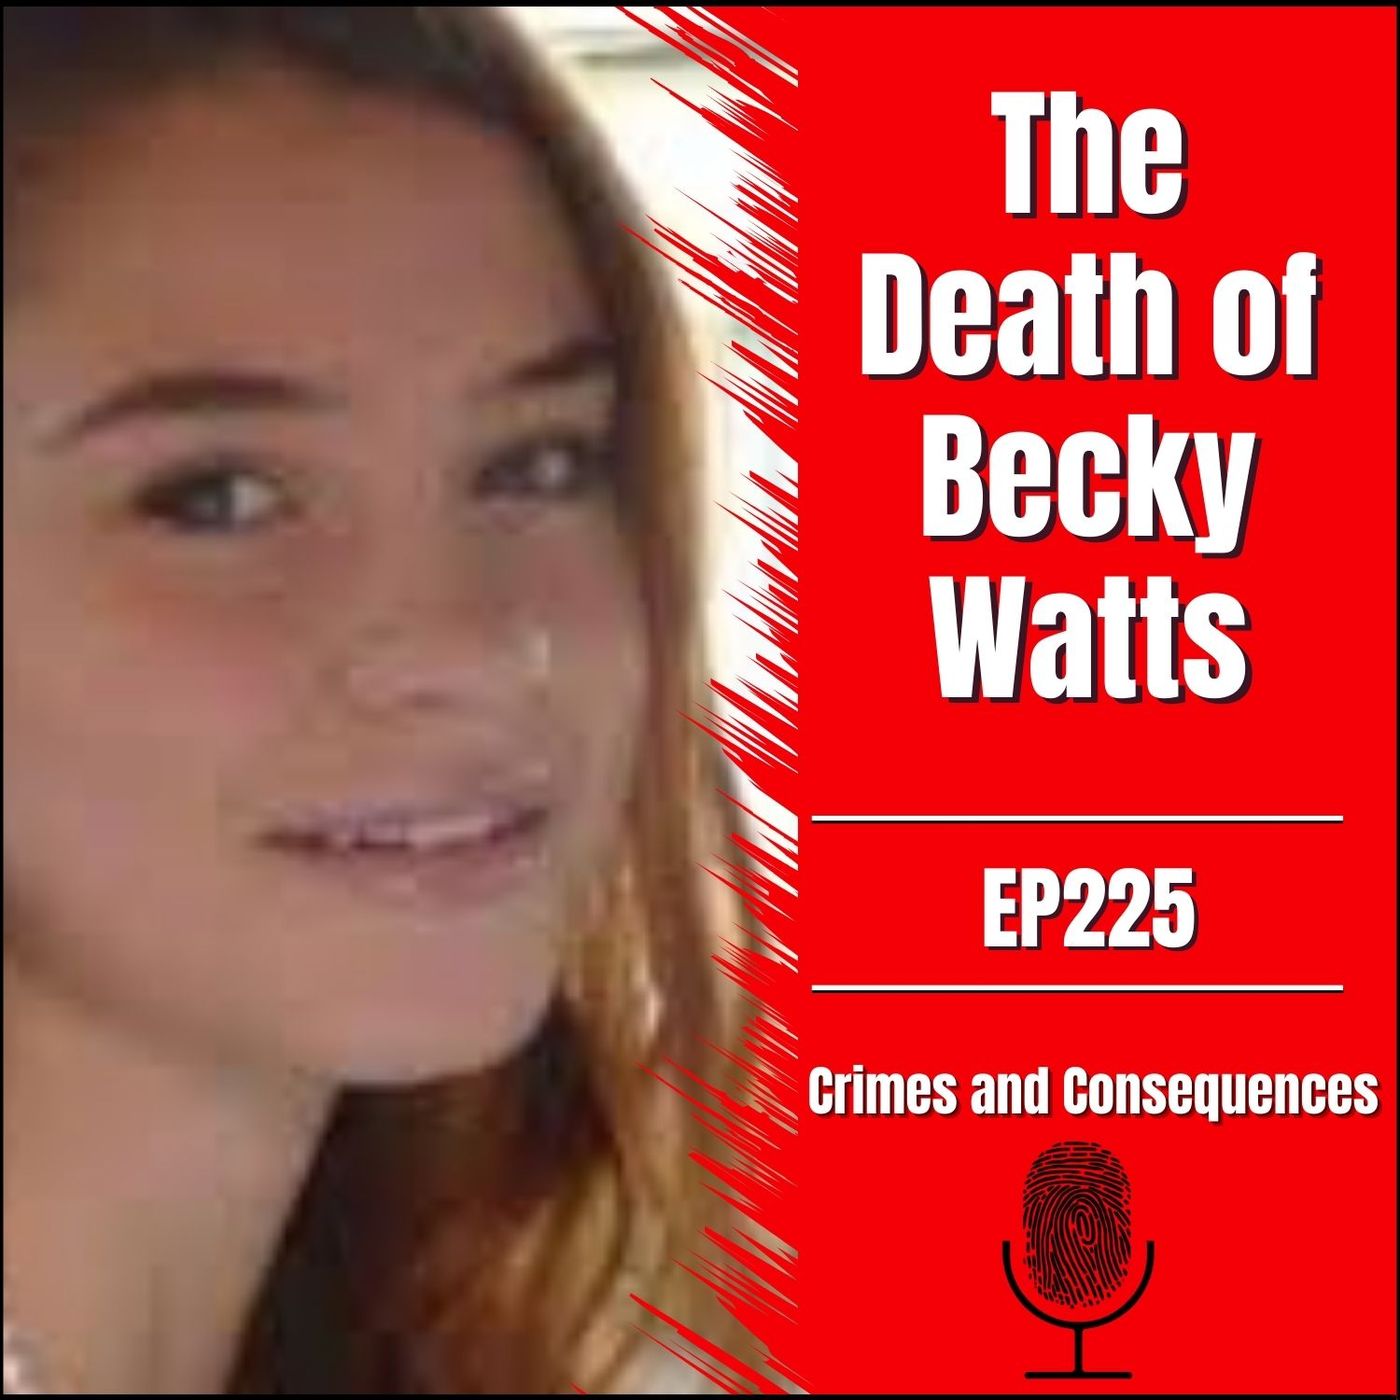 EP225: The Death of Becky Watts